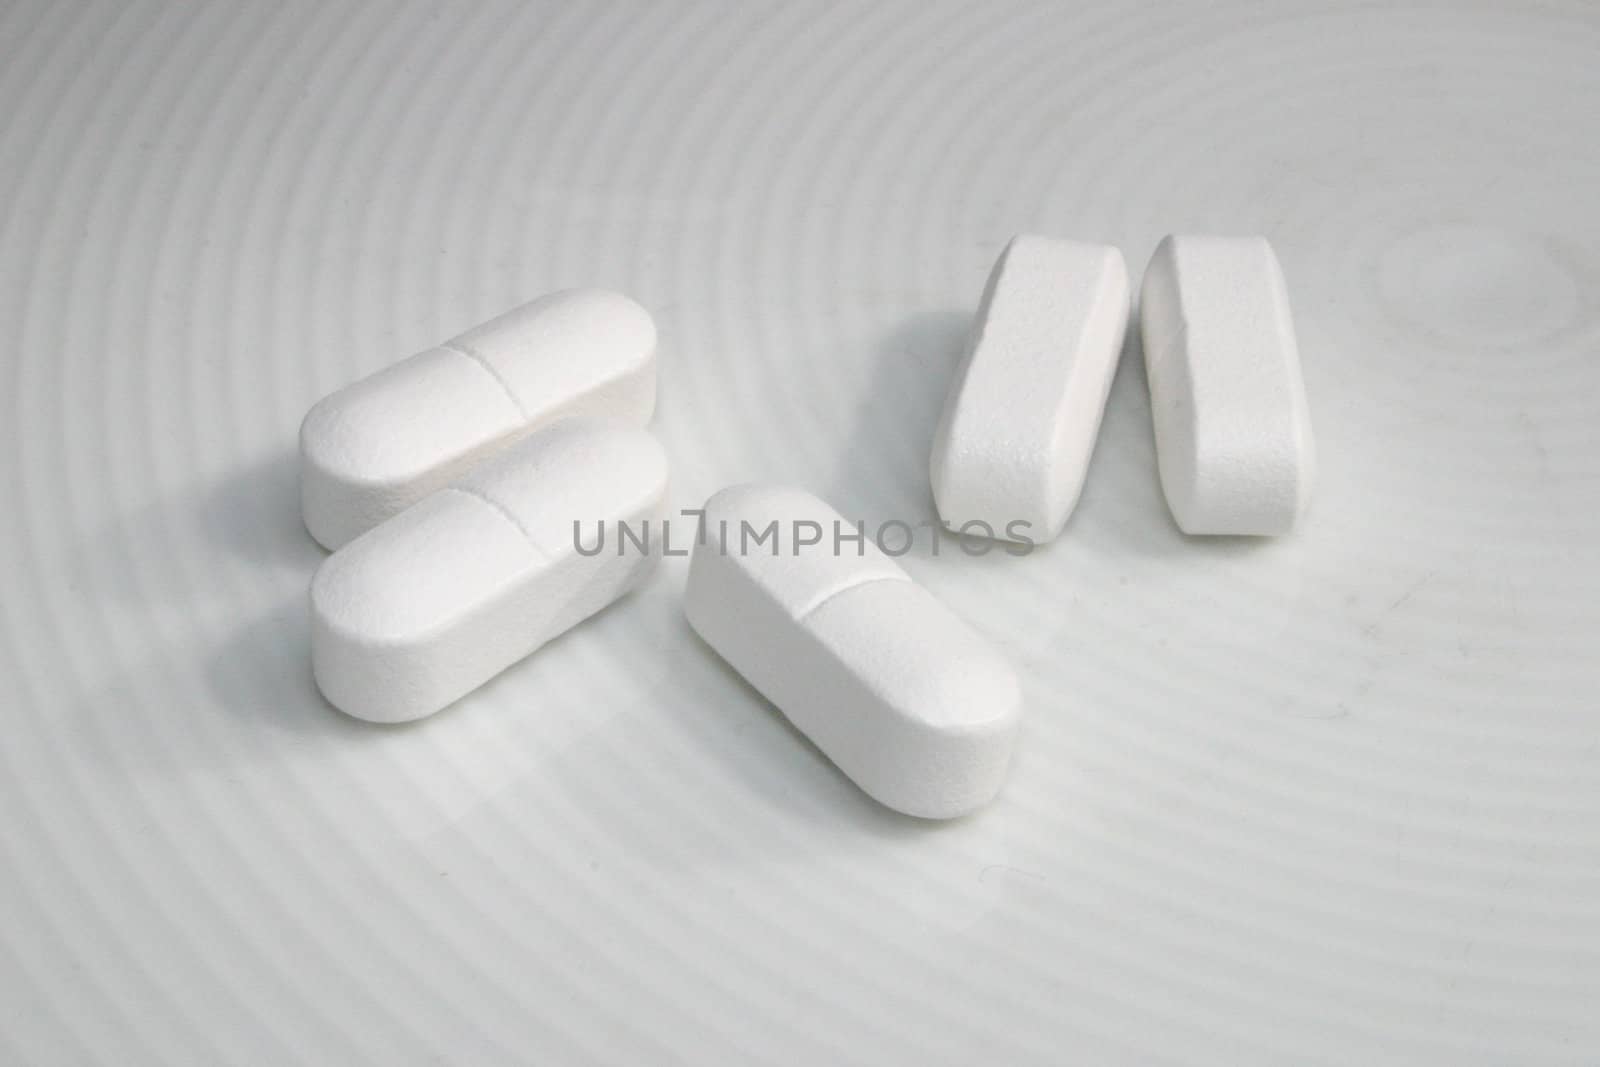 five white tablets on a white dish